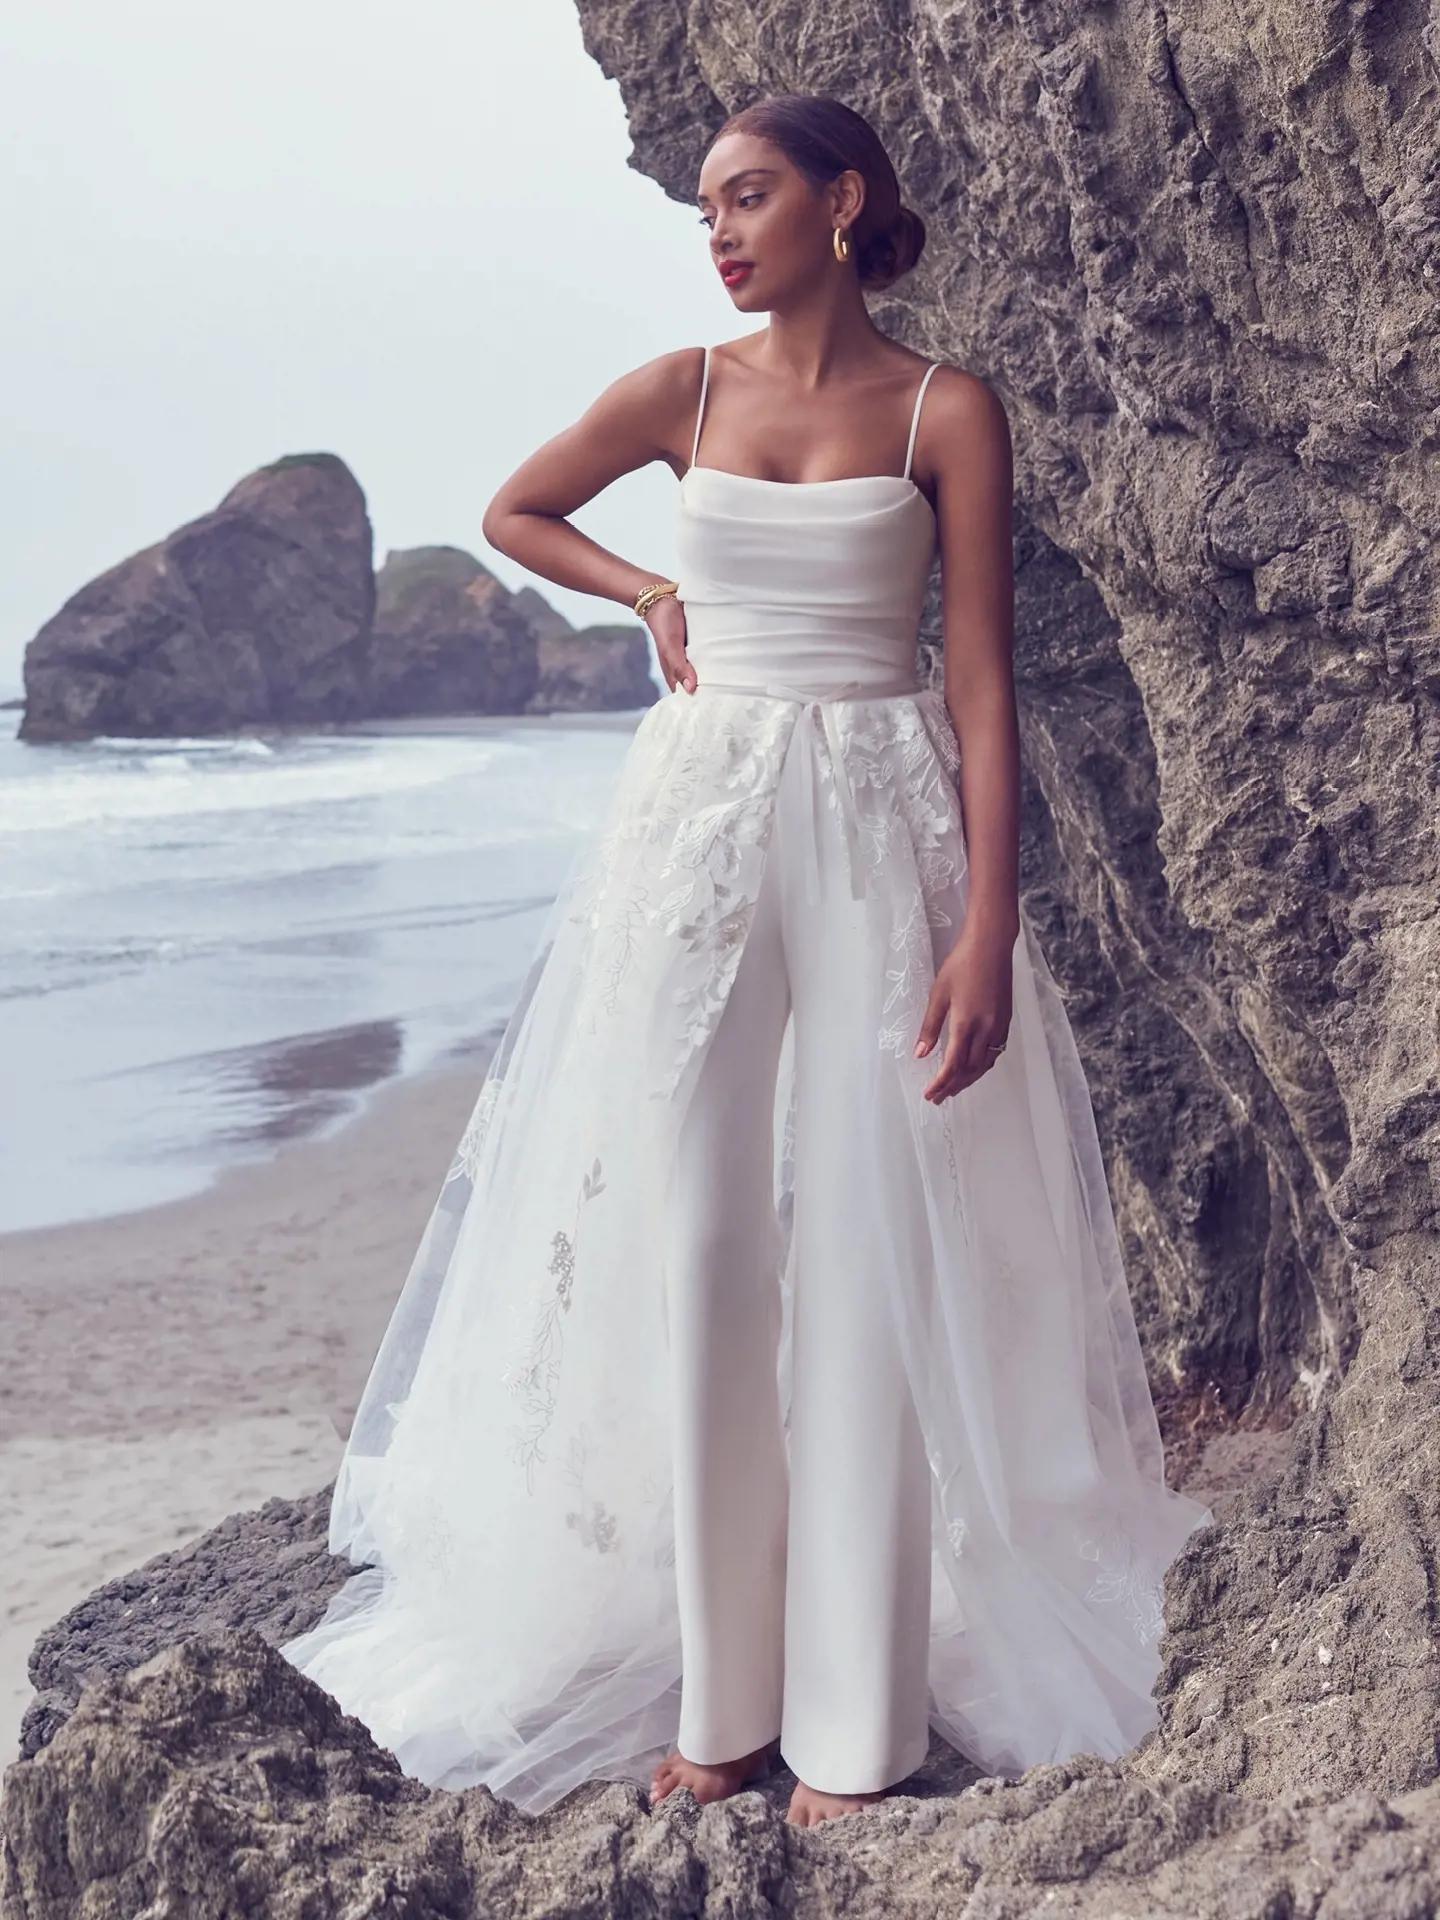 Different Wedding Dresses for Your Ceremony and Reception Image